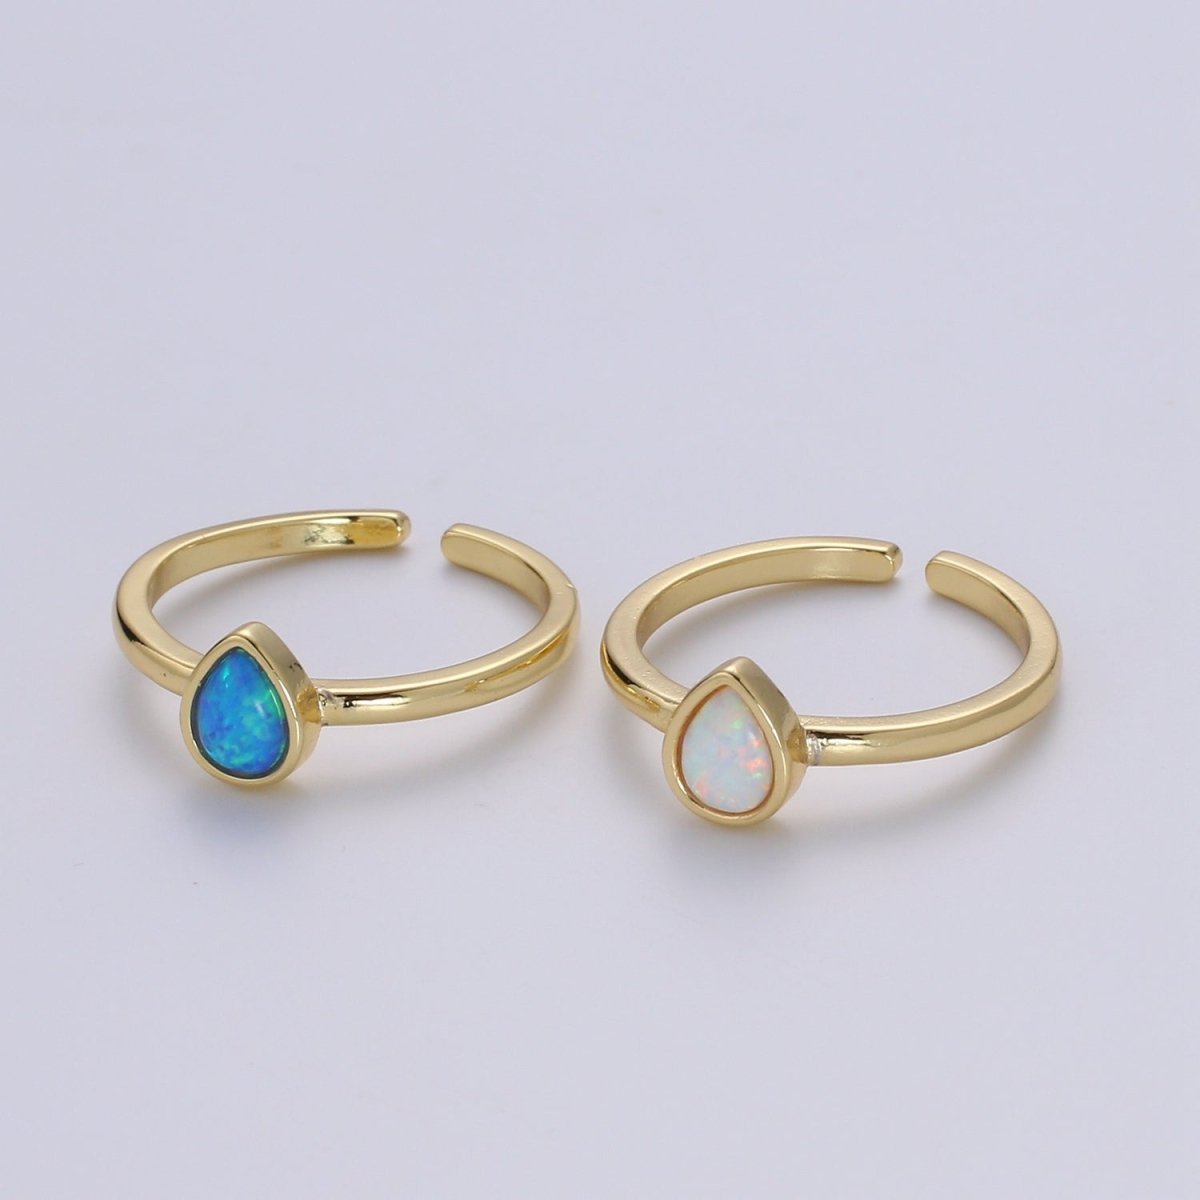 1pc 24K Gold Opal Simulated Ring, Blue opal Lab Pendant Charm Ring, Solitaire White Opal Lab Pear Design Band For DIY Jewelry R539 - DLUXCA